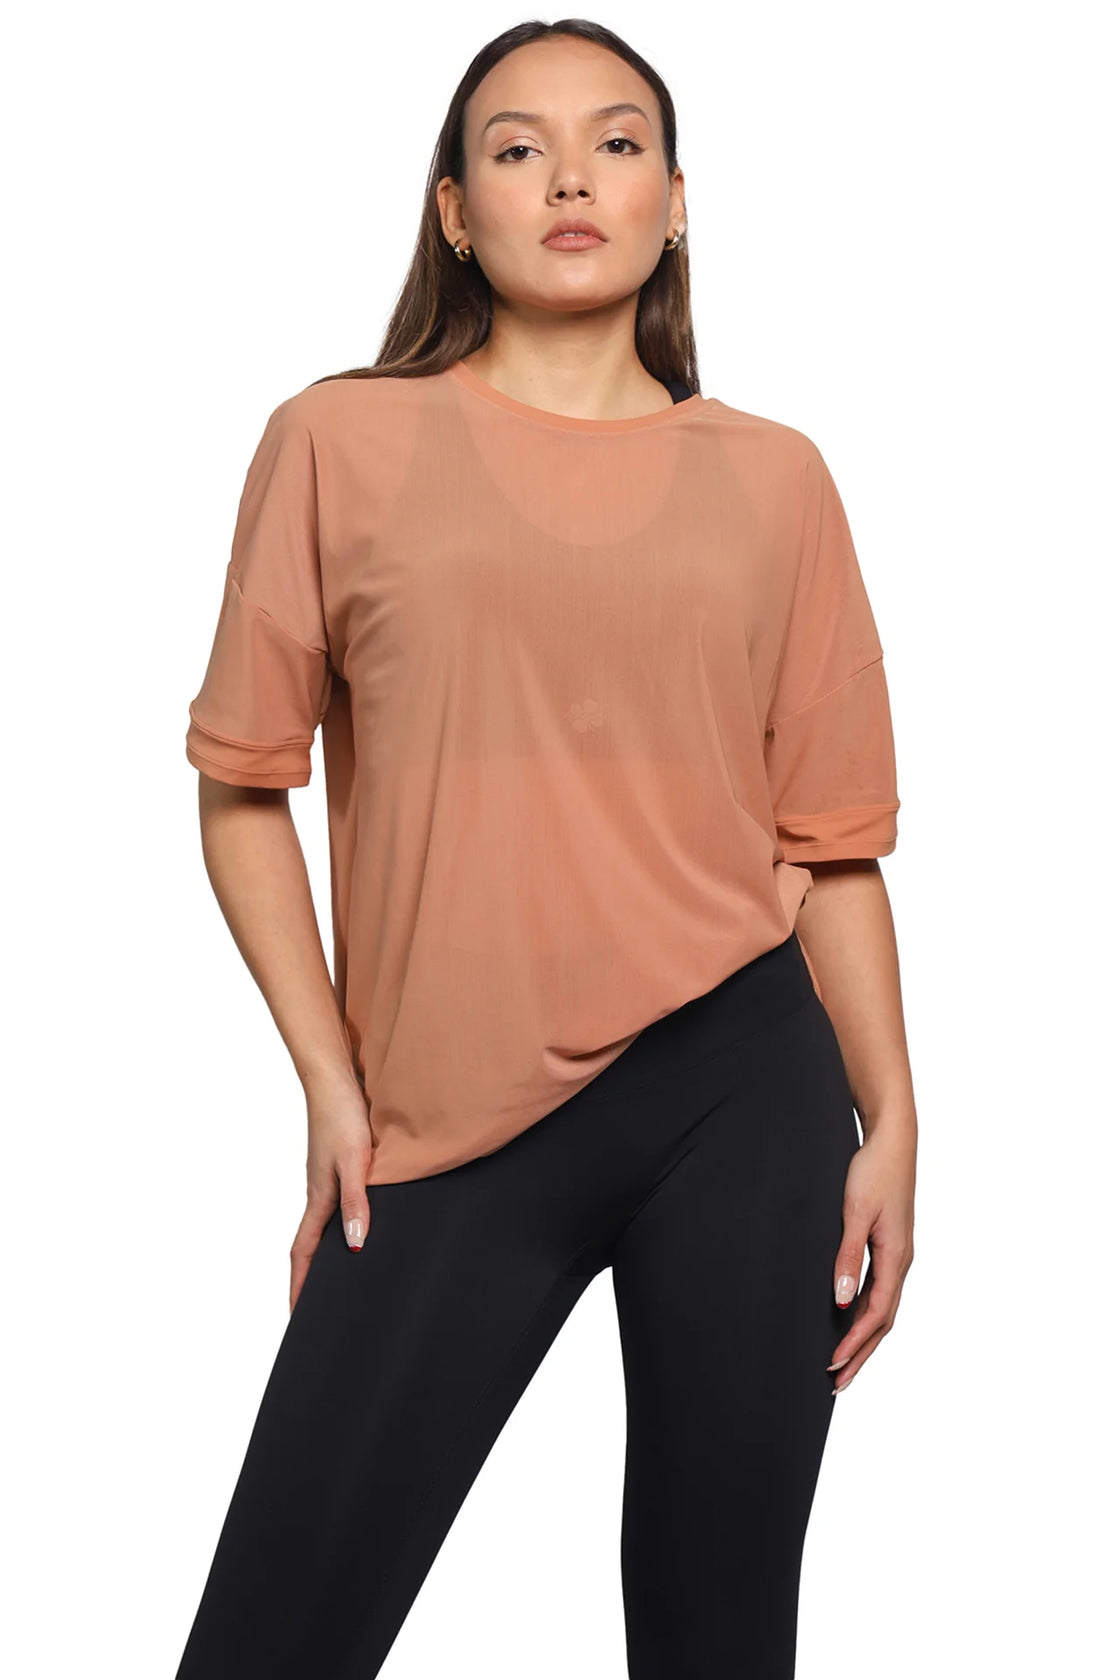 Mesh top for women in brown color 